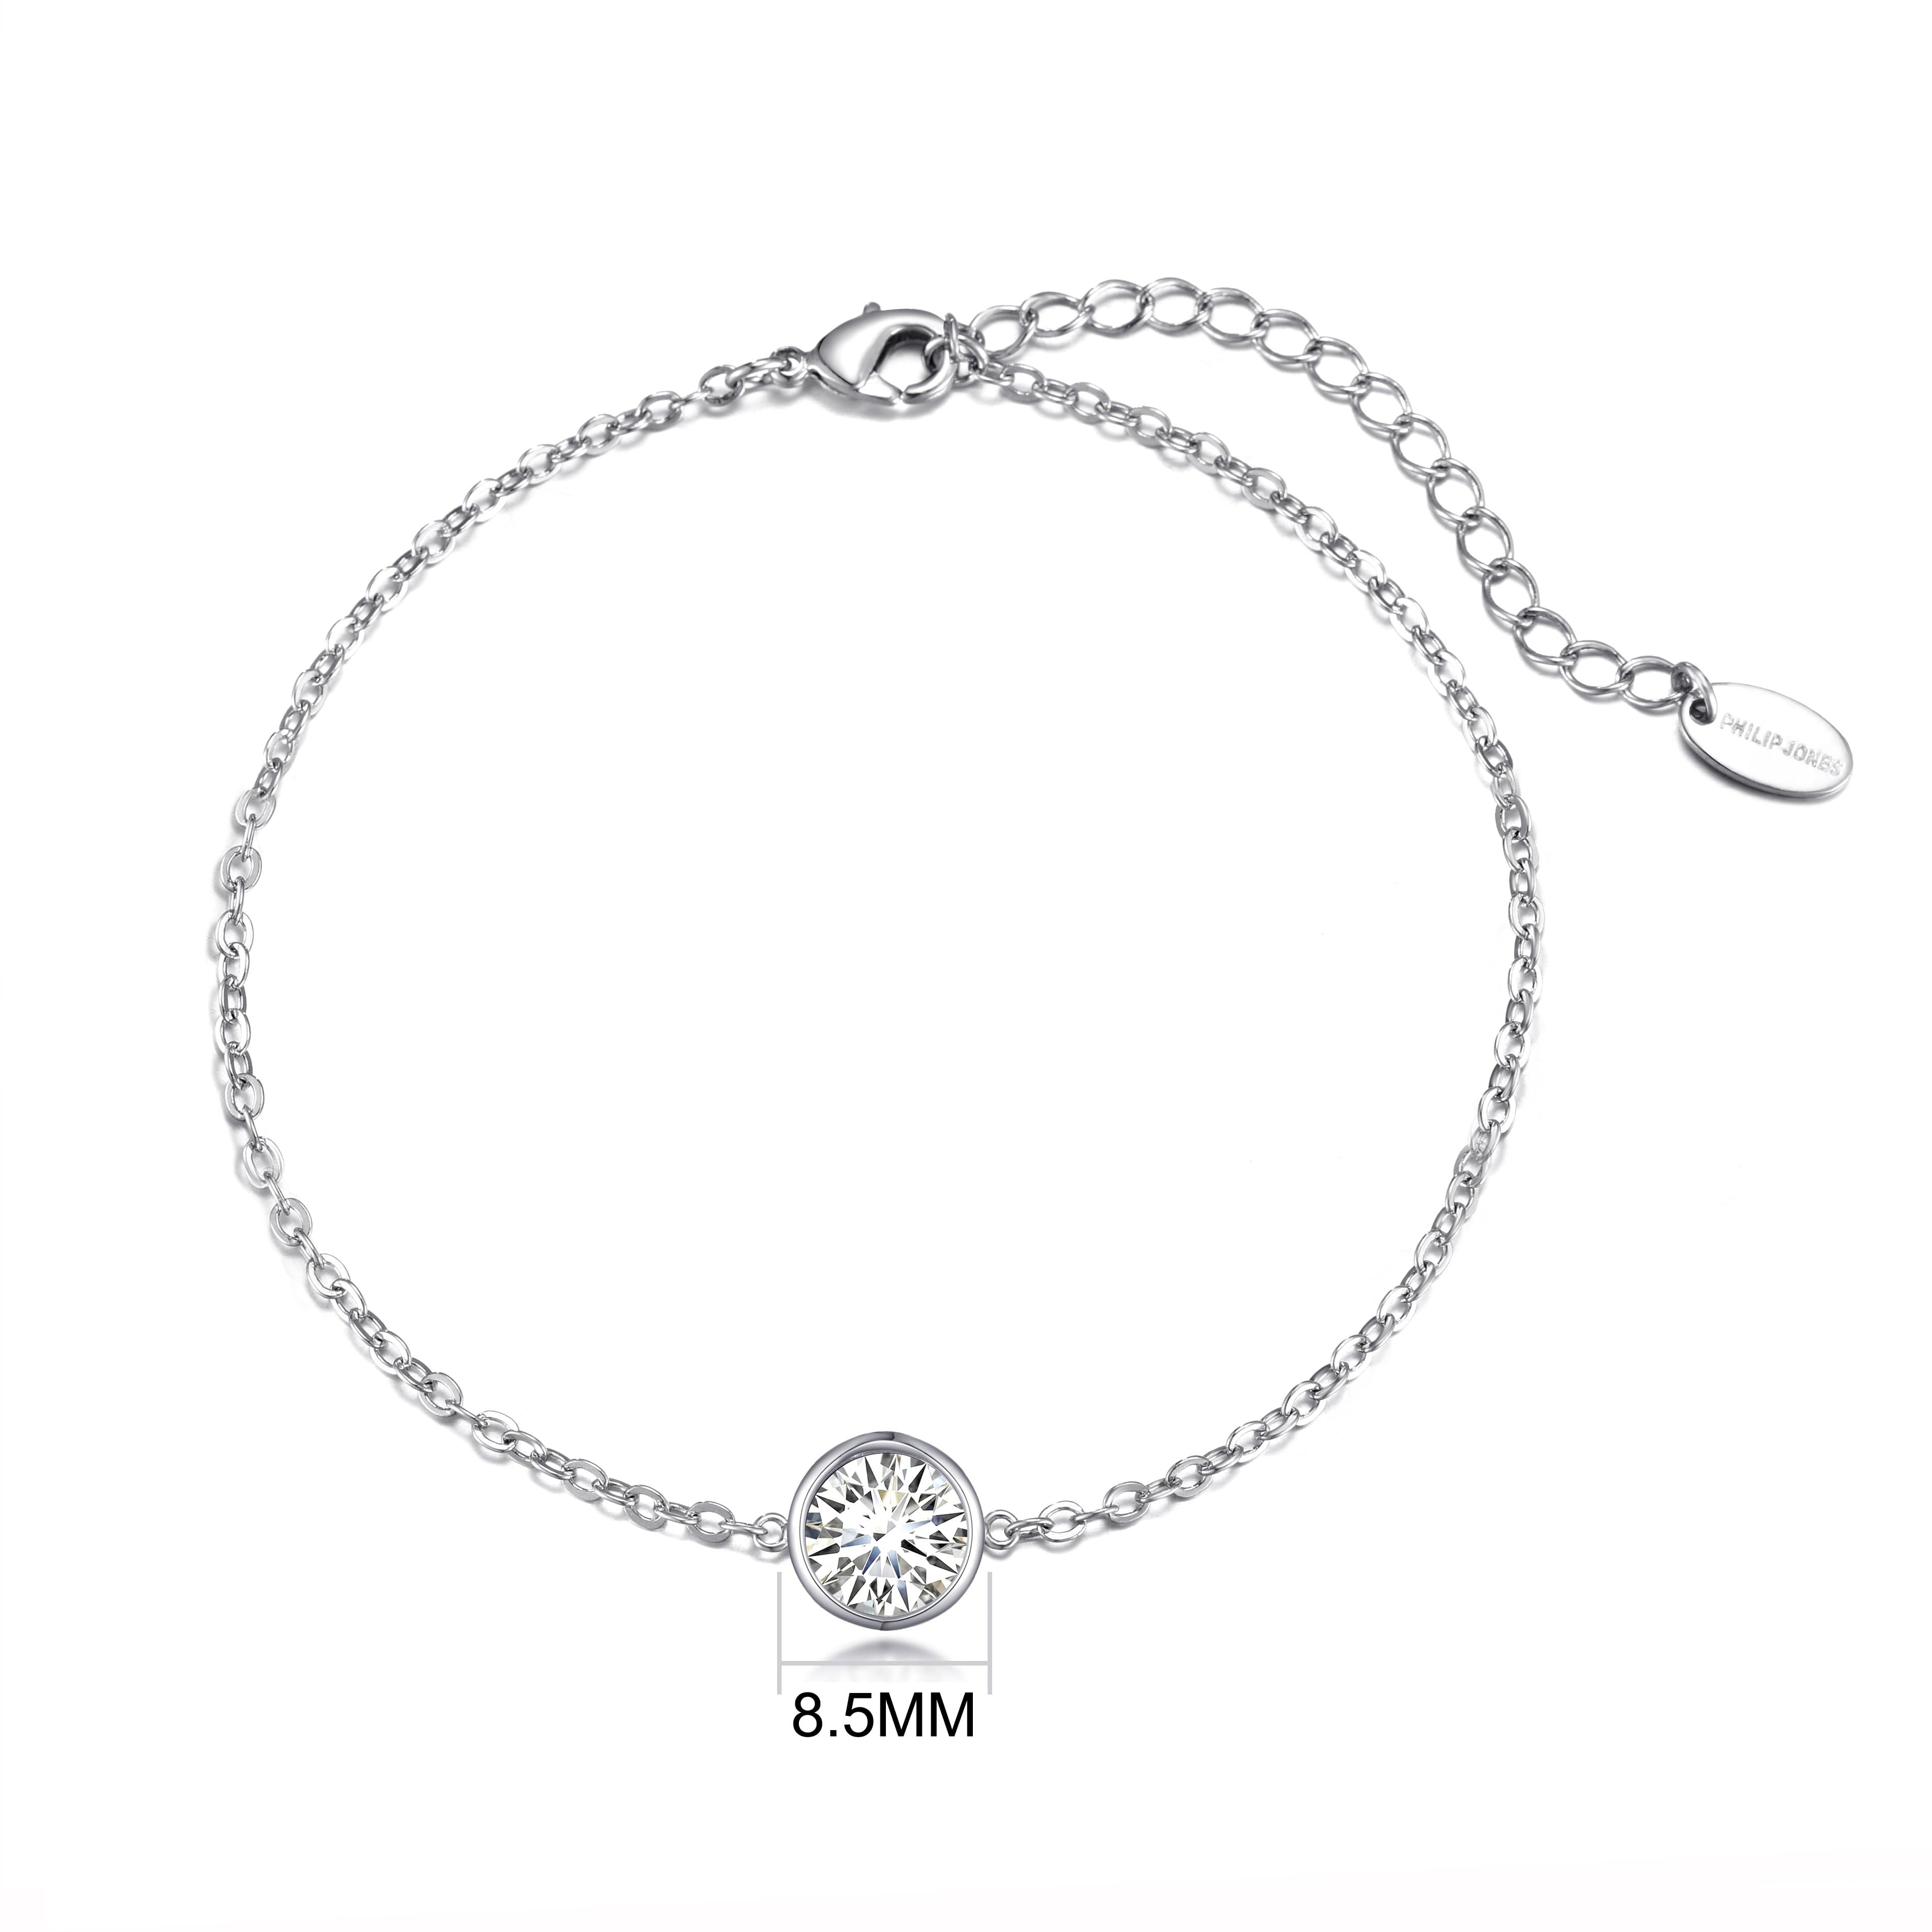 April (Diamond) Birthstone Anklet Created with Zircondia® Crystals